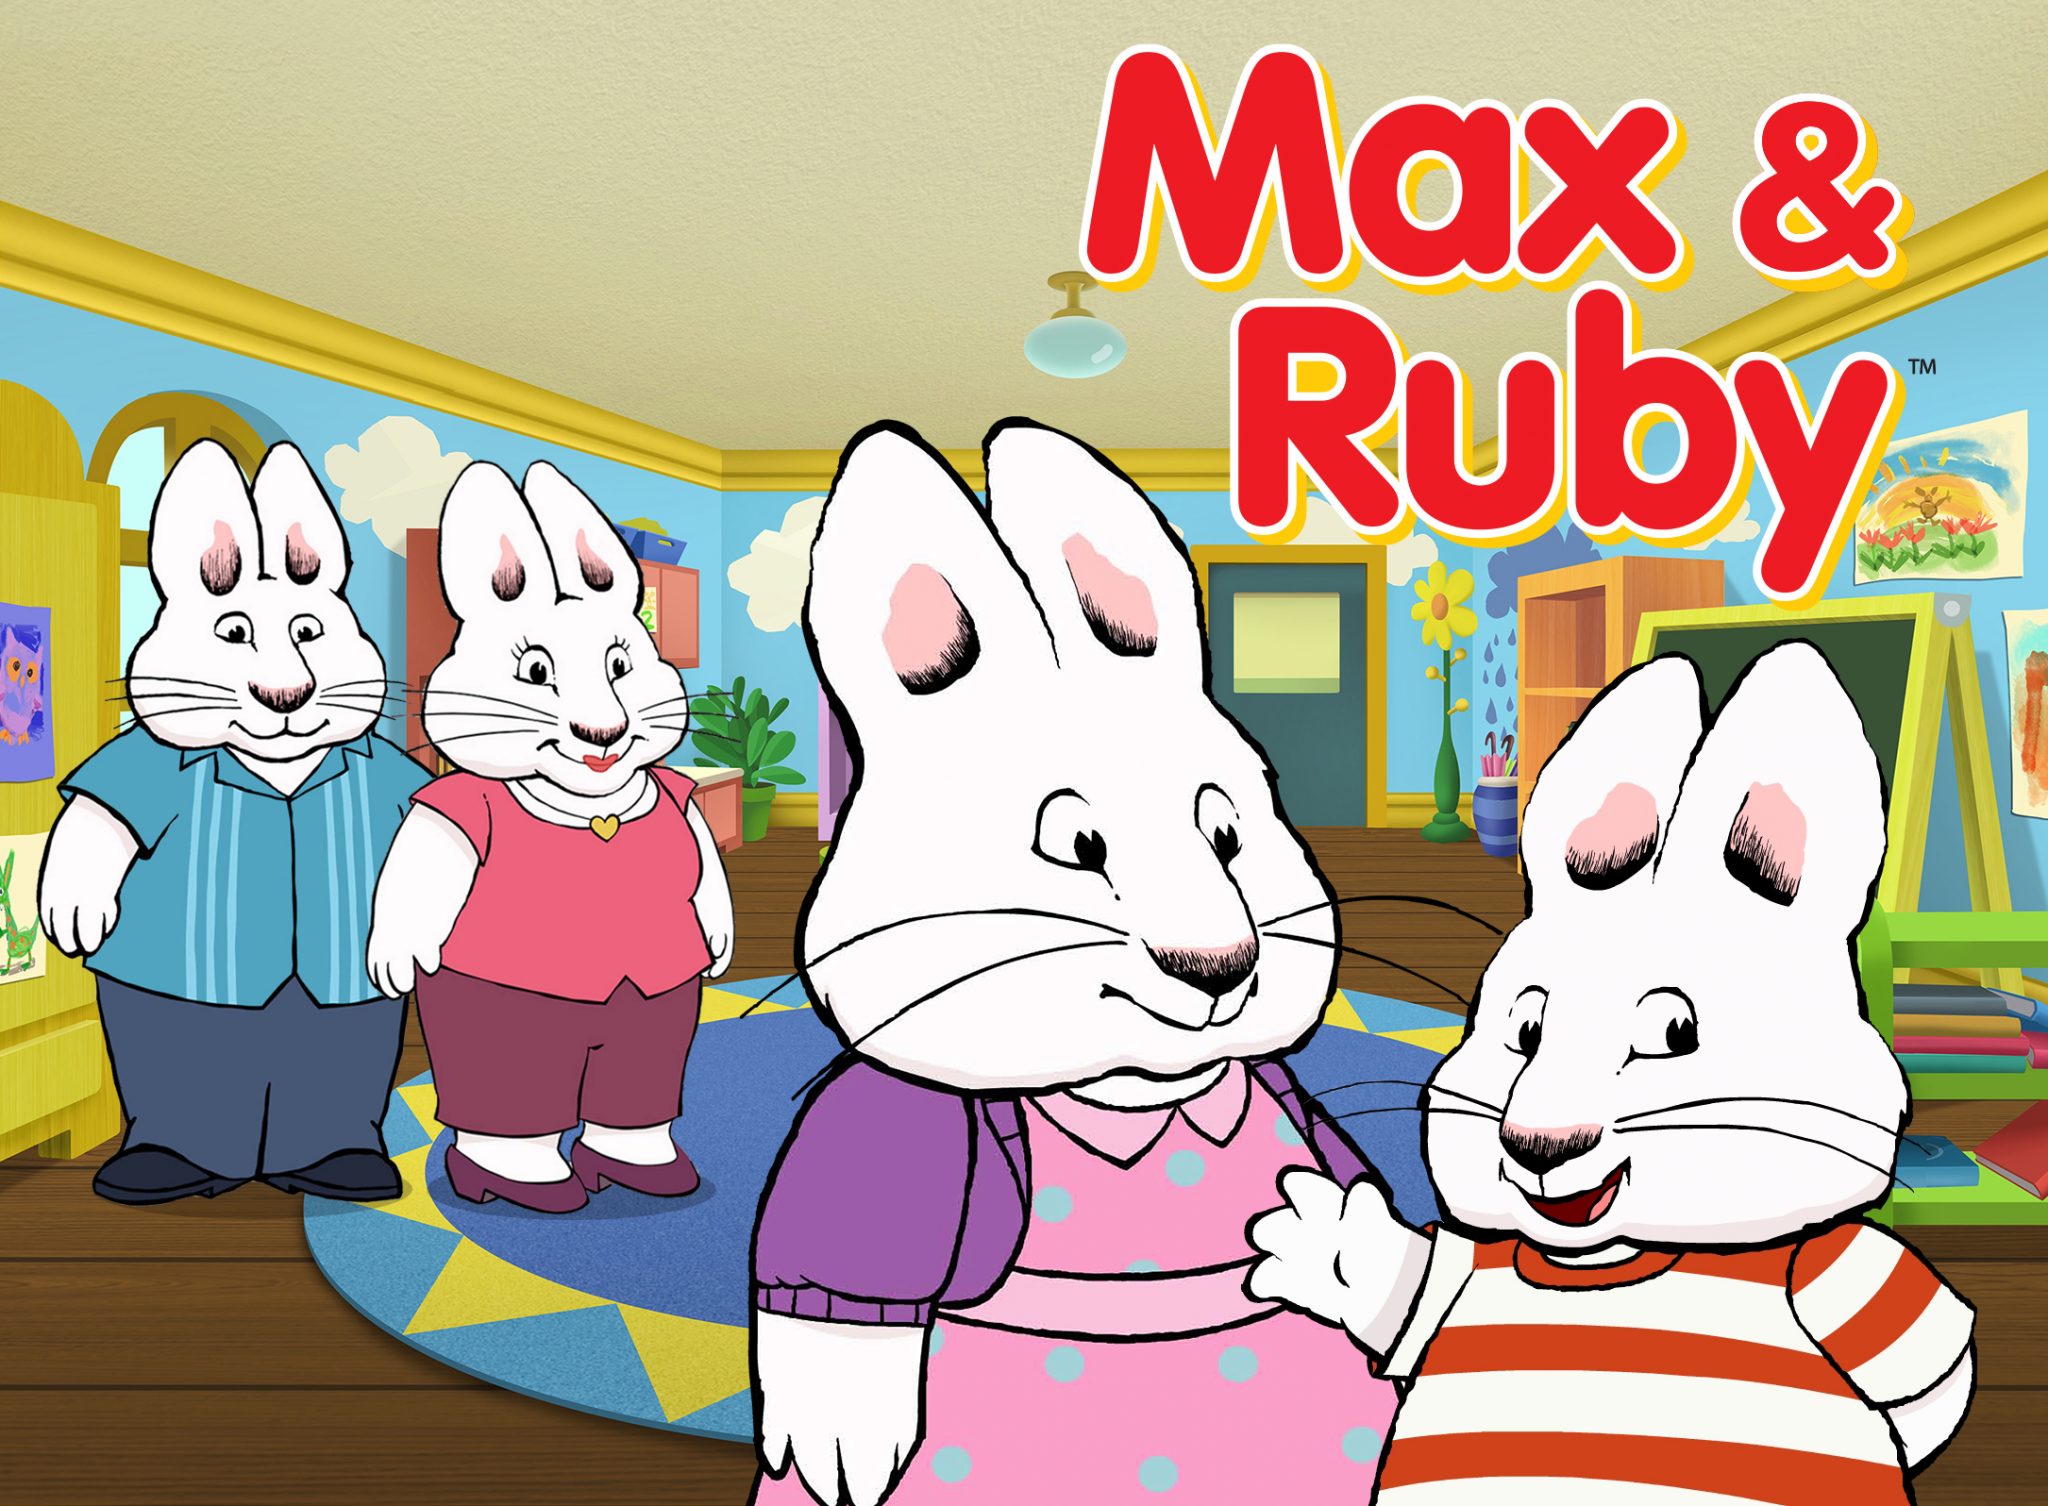 Max and Ruby is a